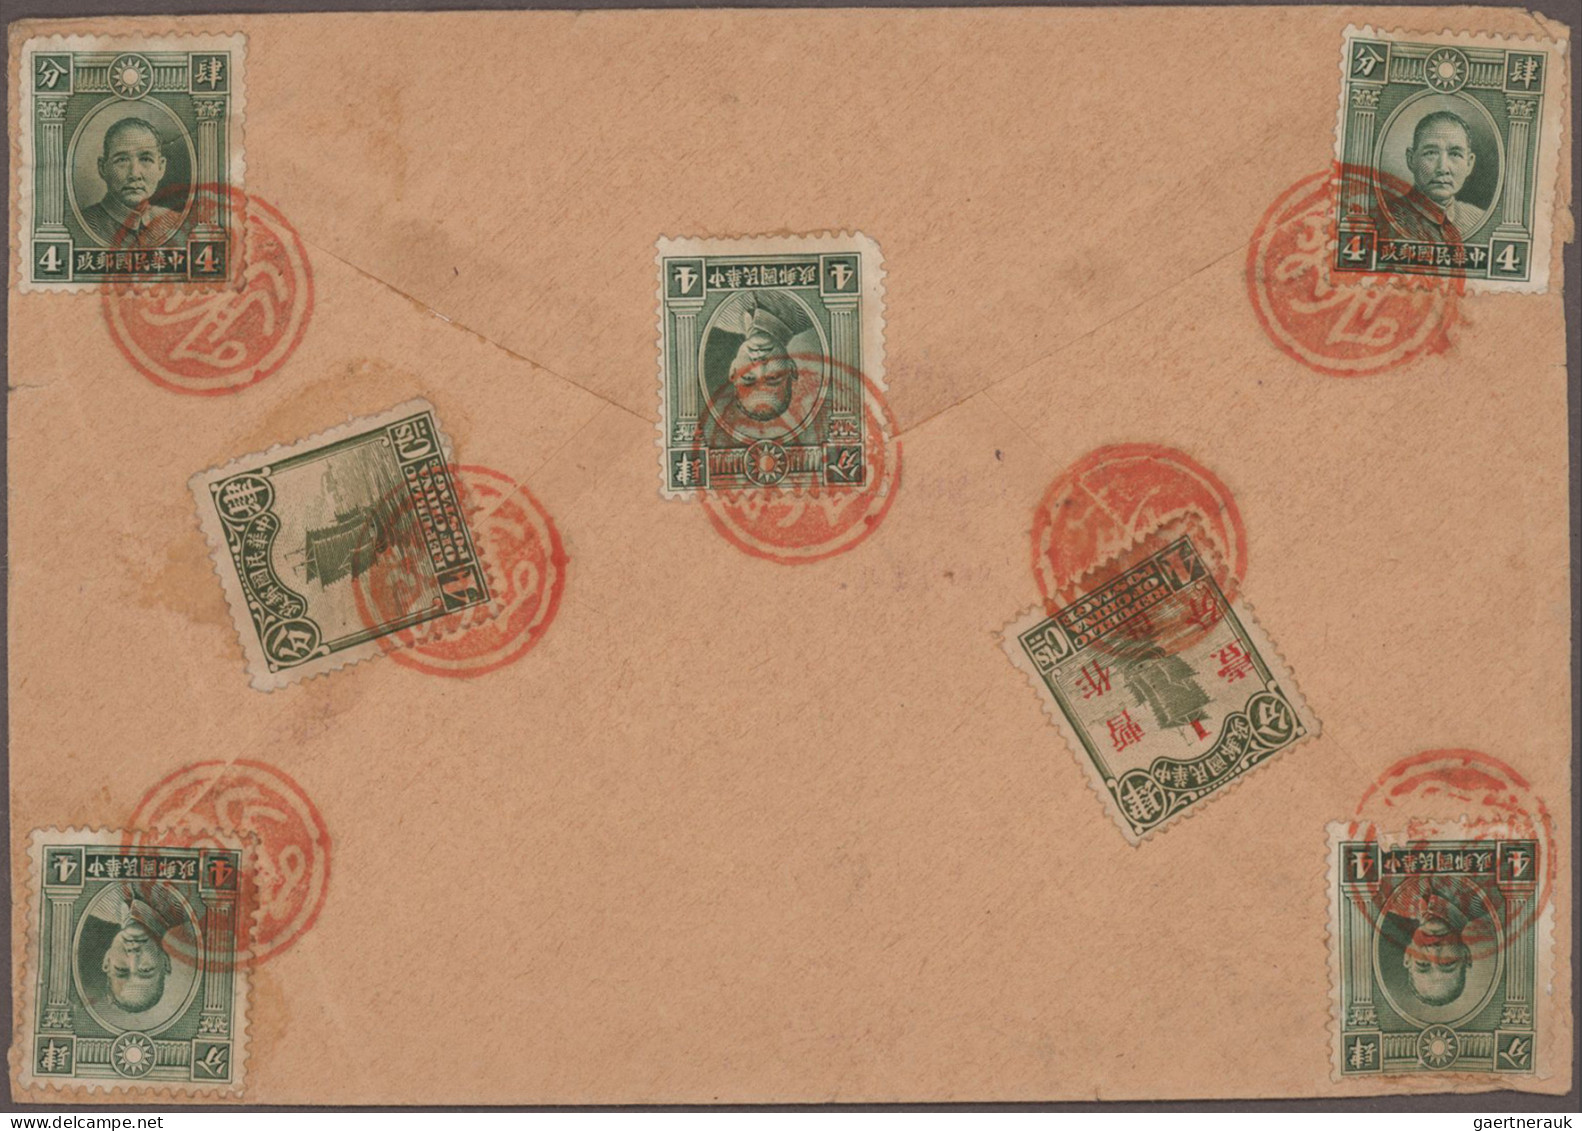 China: 1897/1943, covers (4), used stationery (3), picture post card (view of Lo